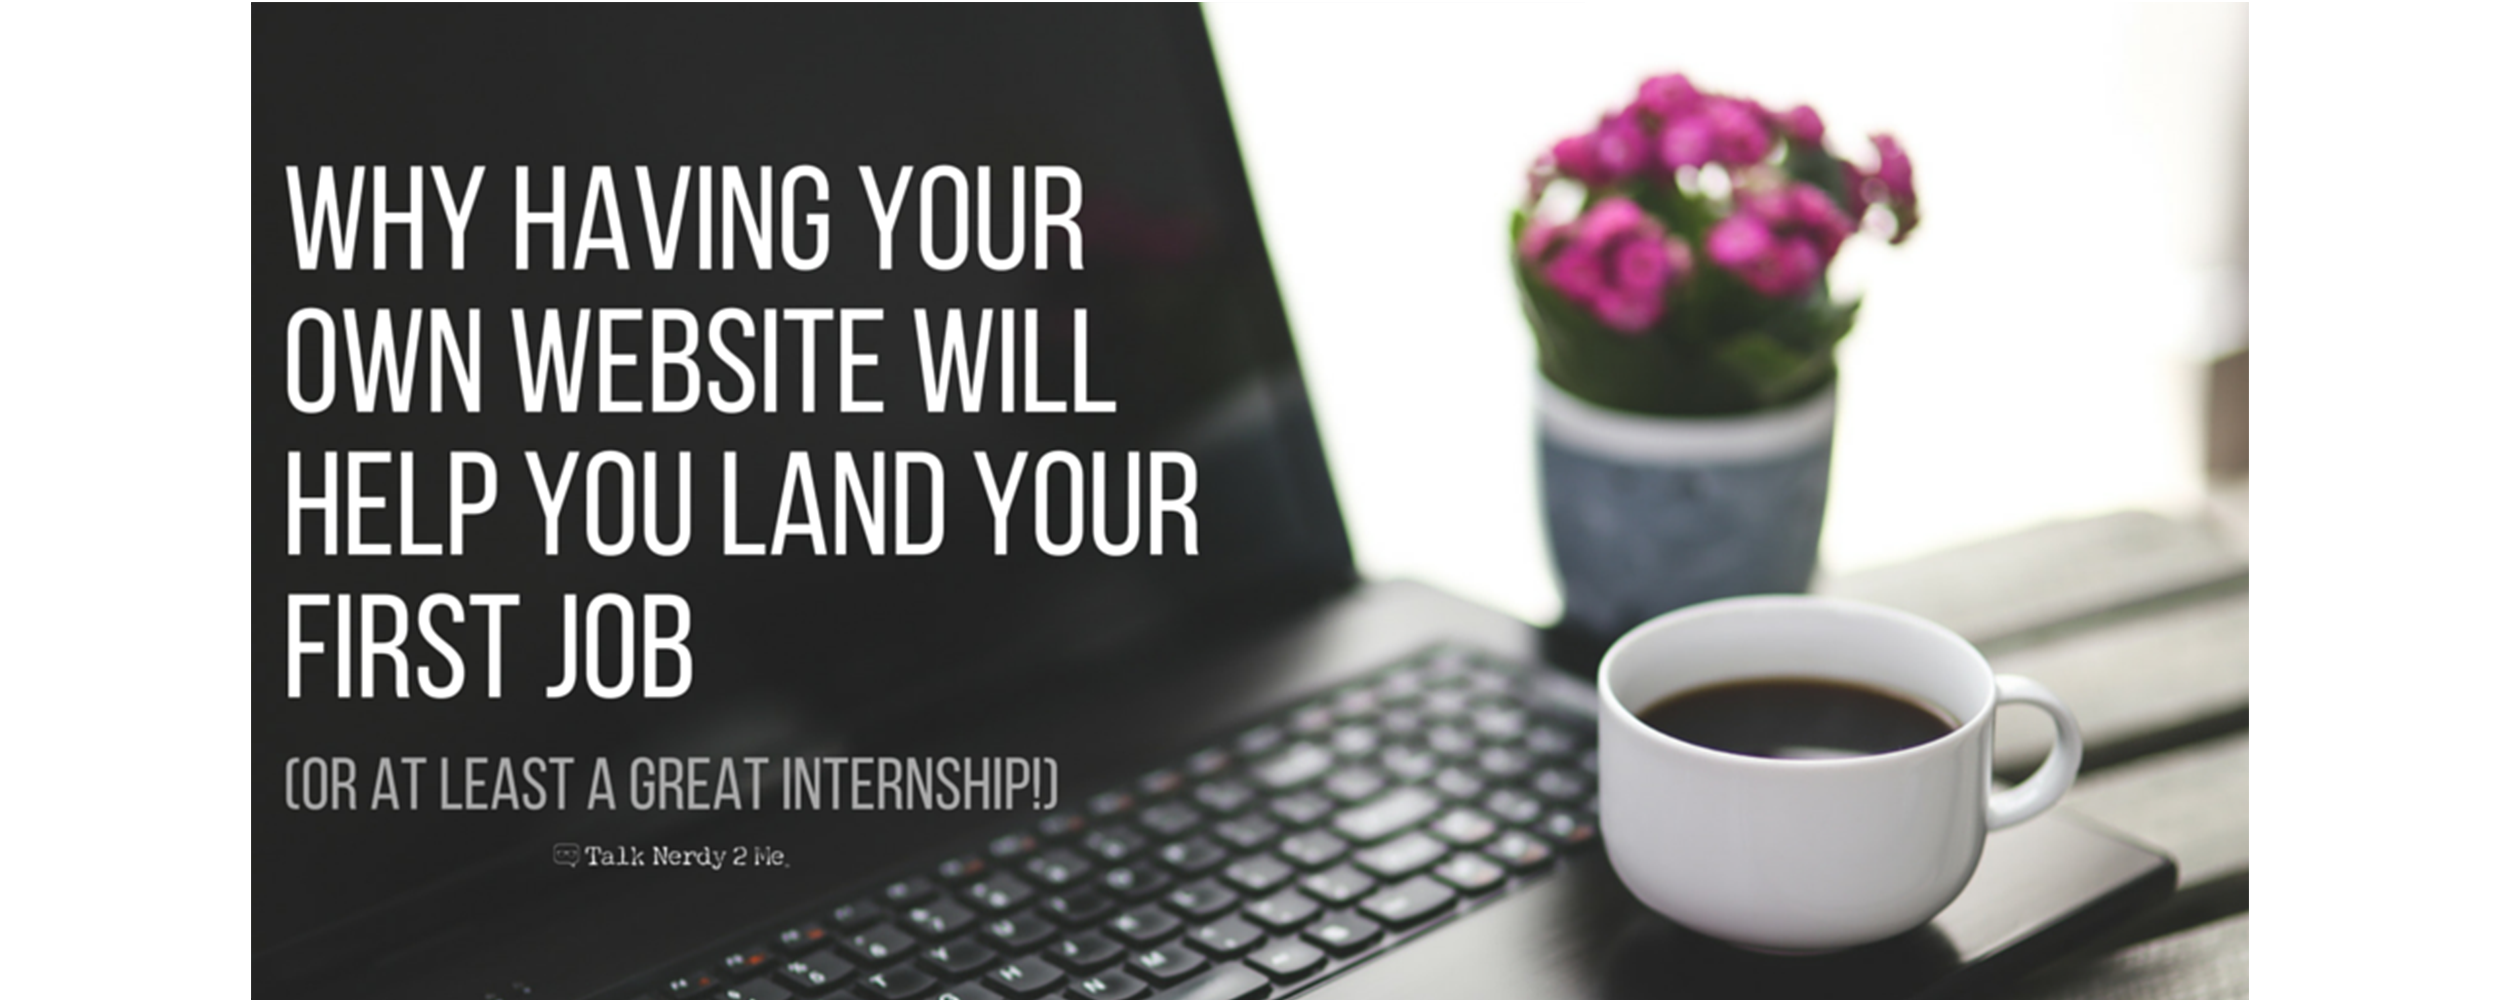 Repost: “Why Having Your Own Website Will Help You Land Your First Job (Or At Least a Great Internship!)”